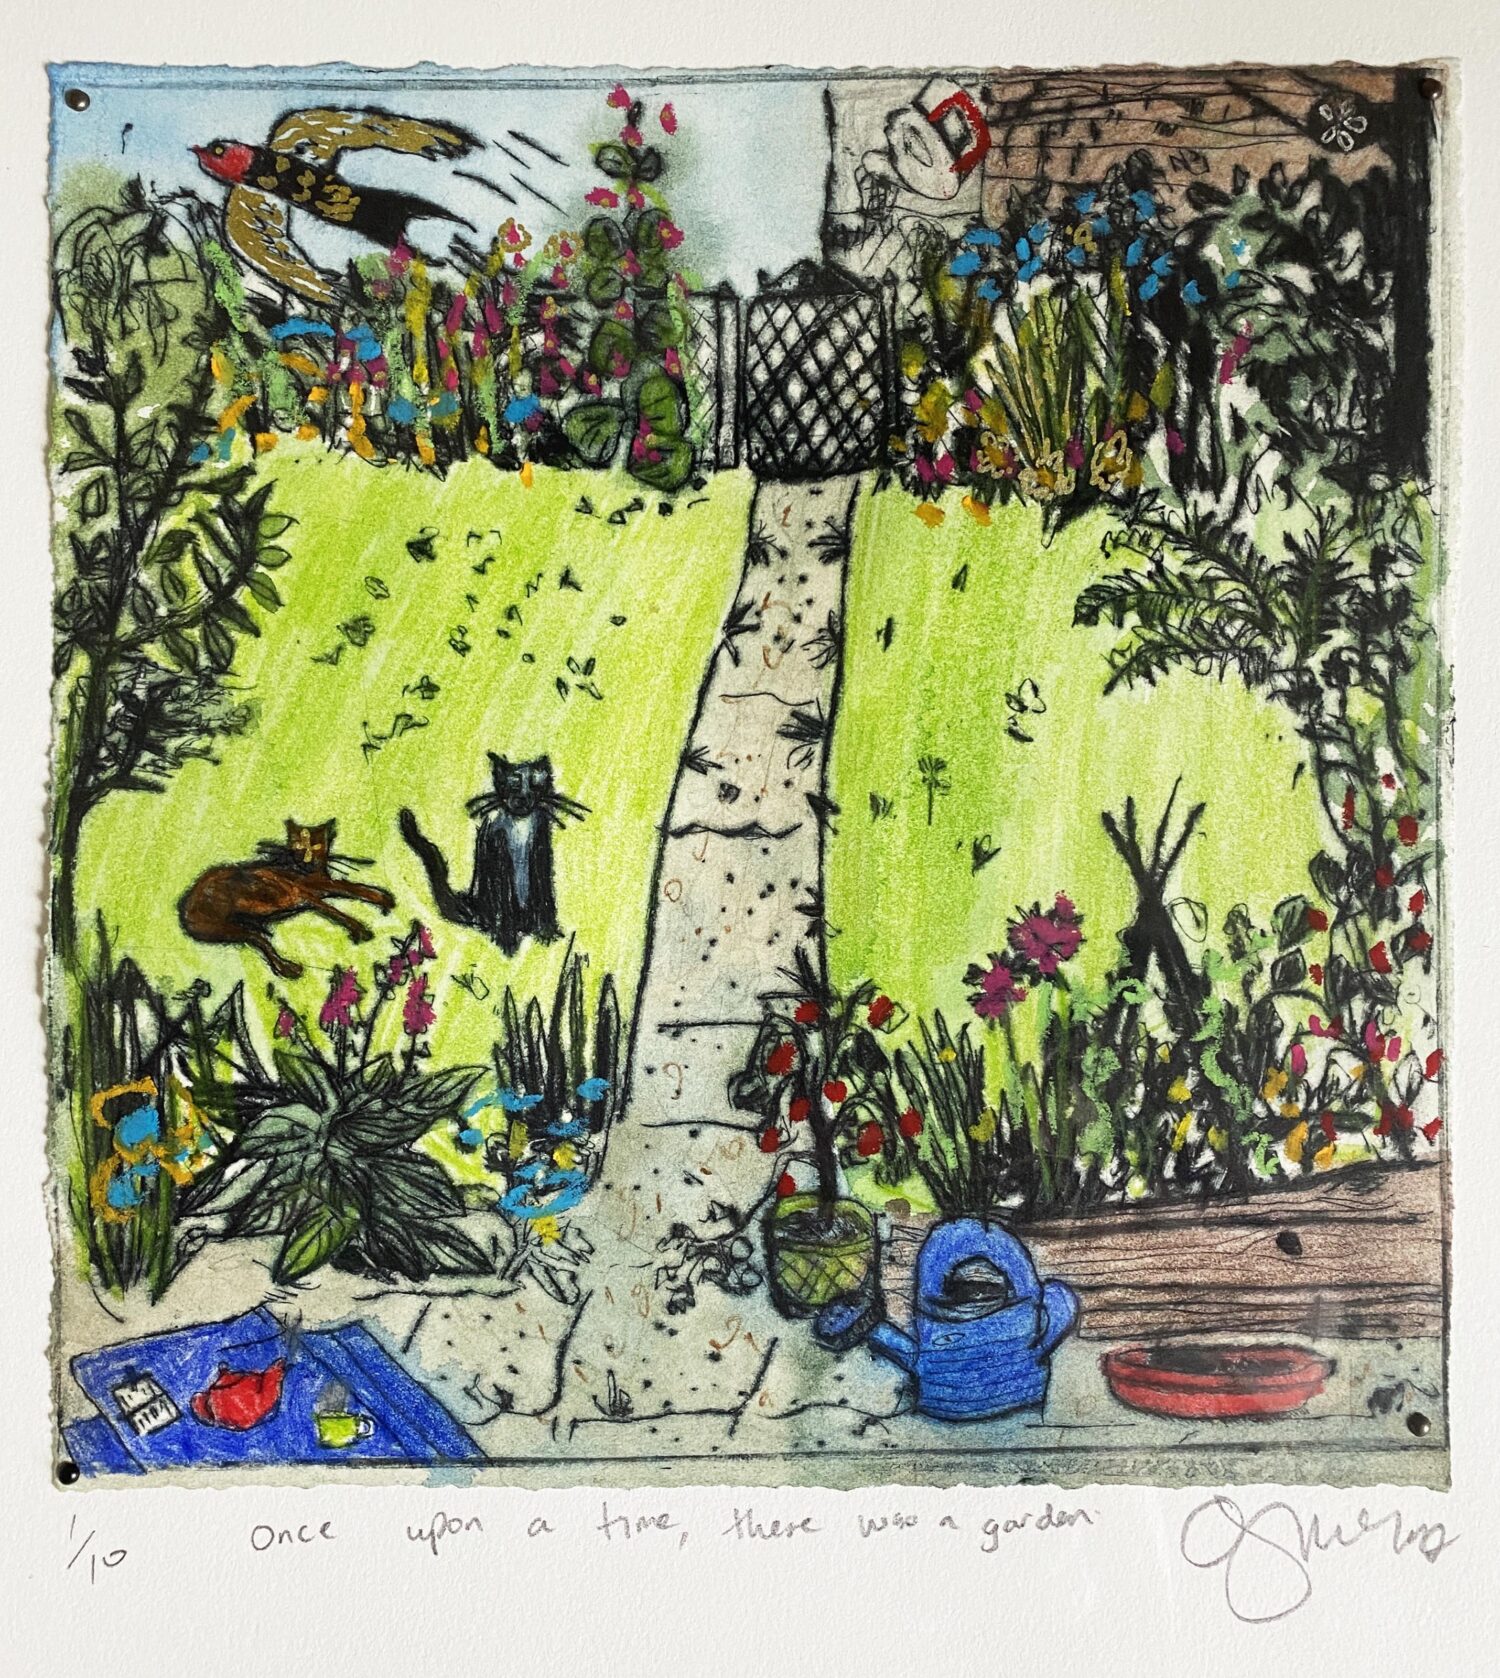 A hand coloured drypoint print, depicting a grassy lawn framed by colourful plants with a concrete path going through the middle, leading to a small garden gate and a house beyond. There are two cats lounging in the grass, and a swallow flying above them.